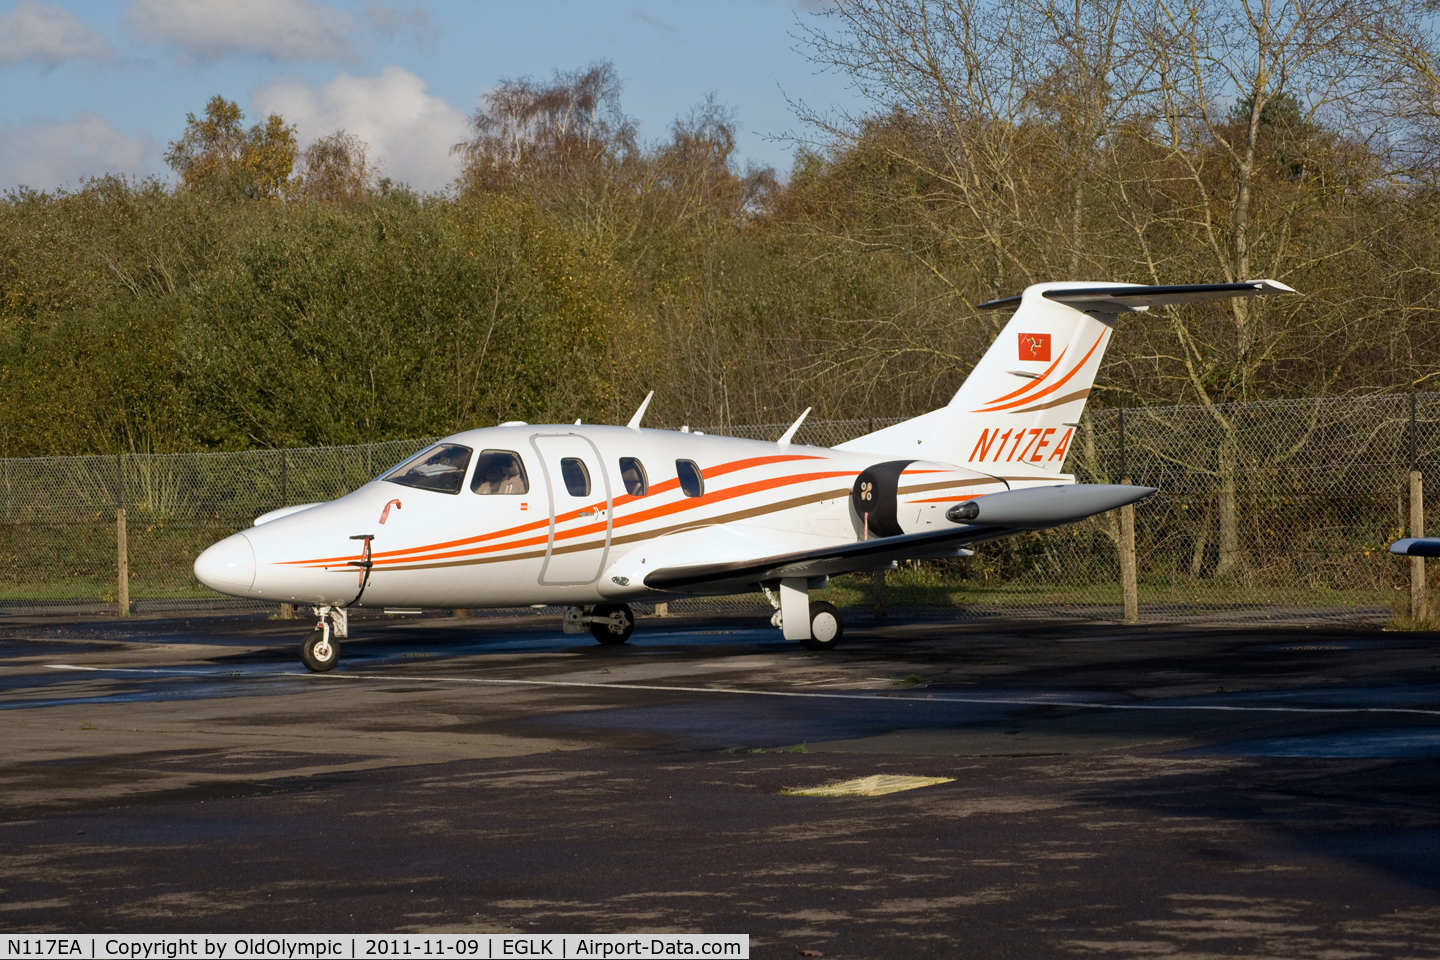 N117EA, 2007 Eclipse Aviation Corp EA500 C/N 000104, Parked